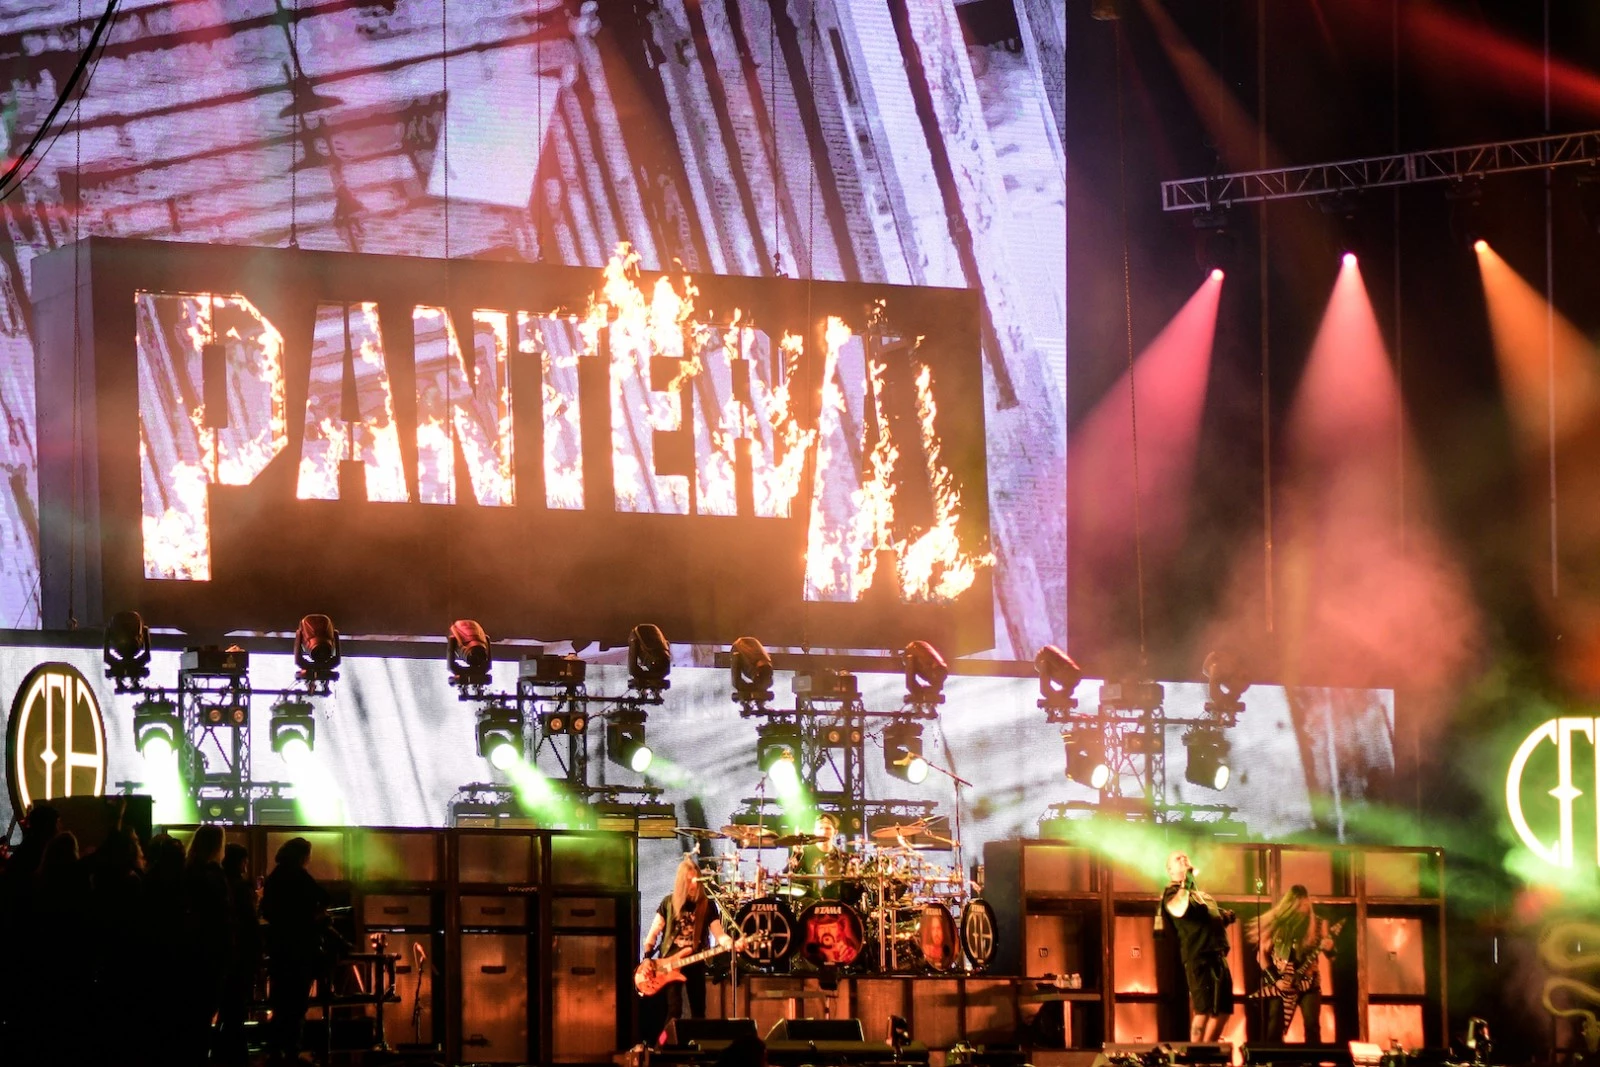 Charlie Benante Has Never Had So Much Hate Since Joining Pantera